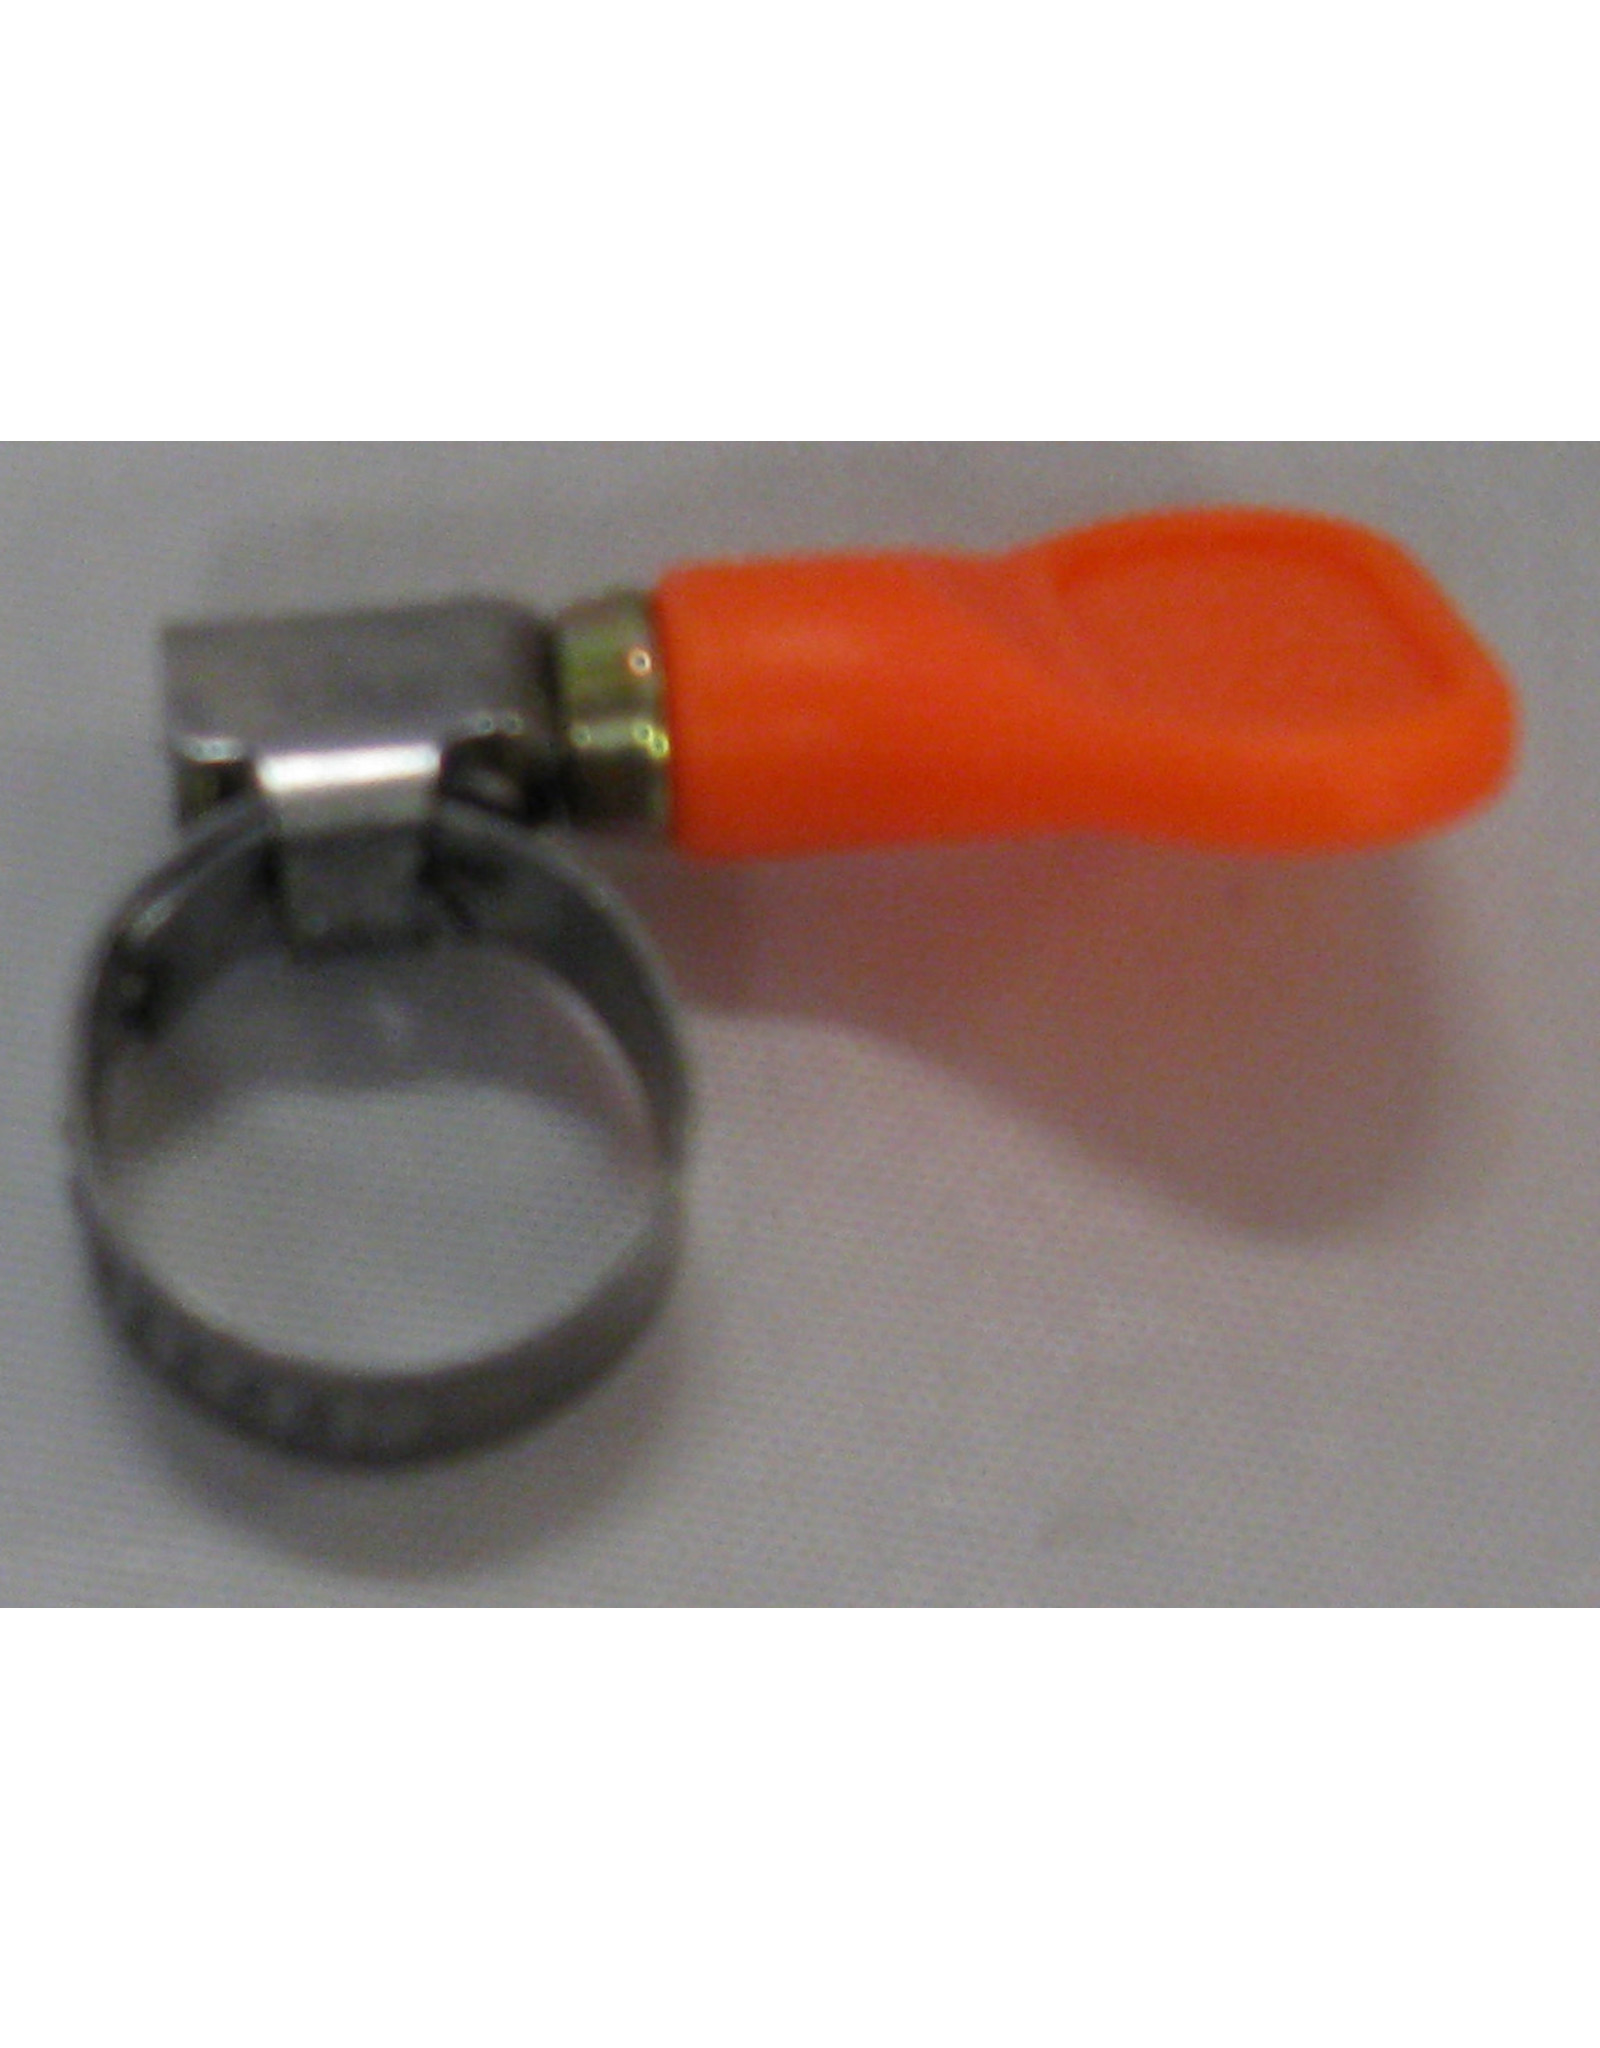 Easy-Turn Orange 5/8" Butterfly clamp